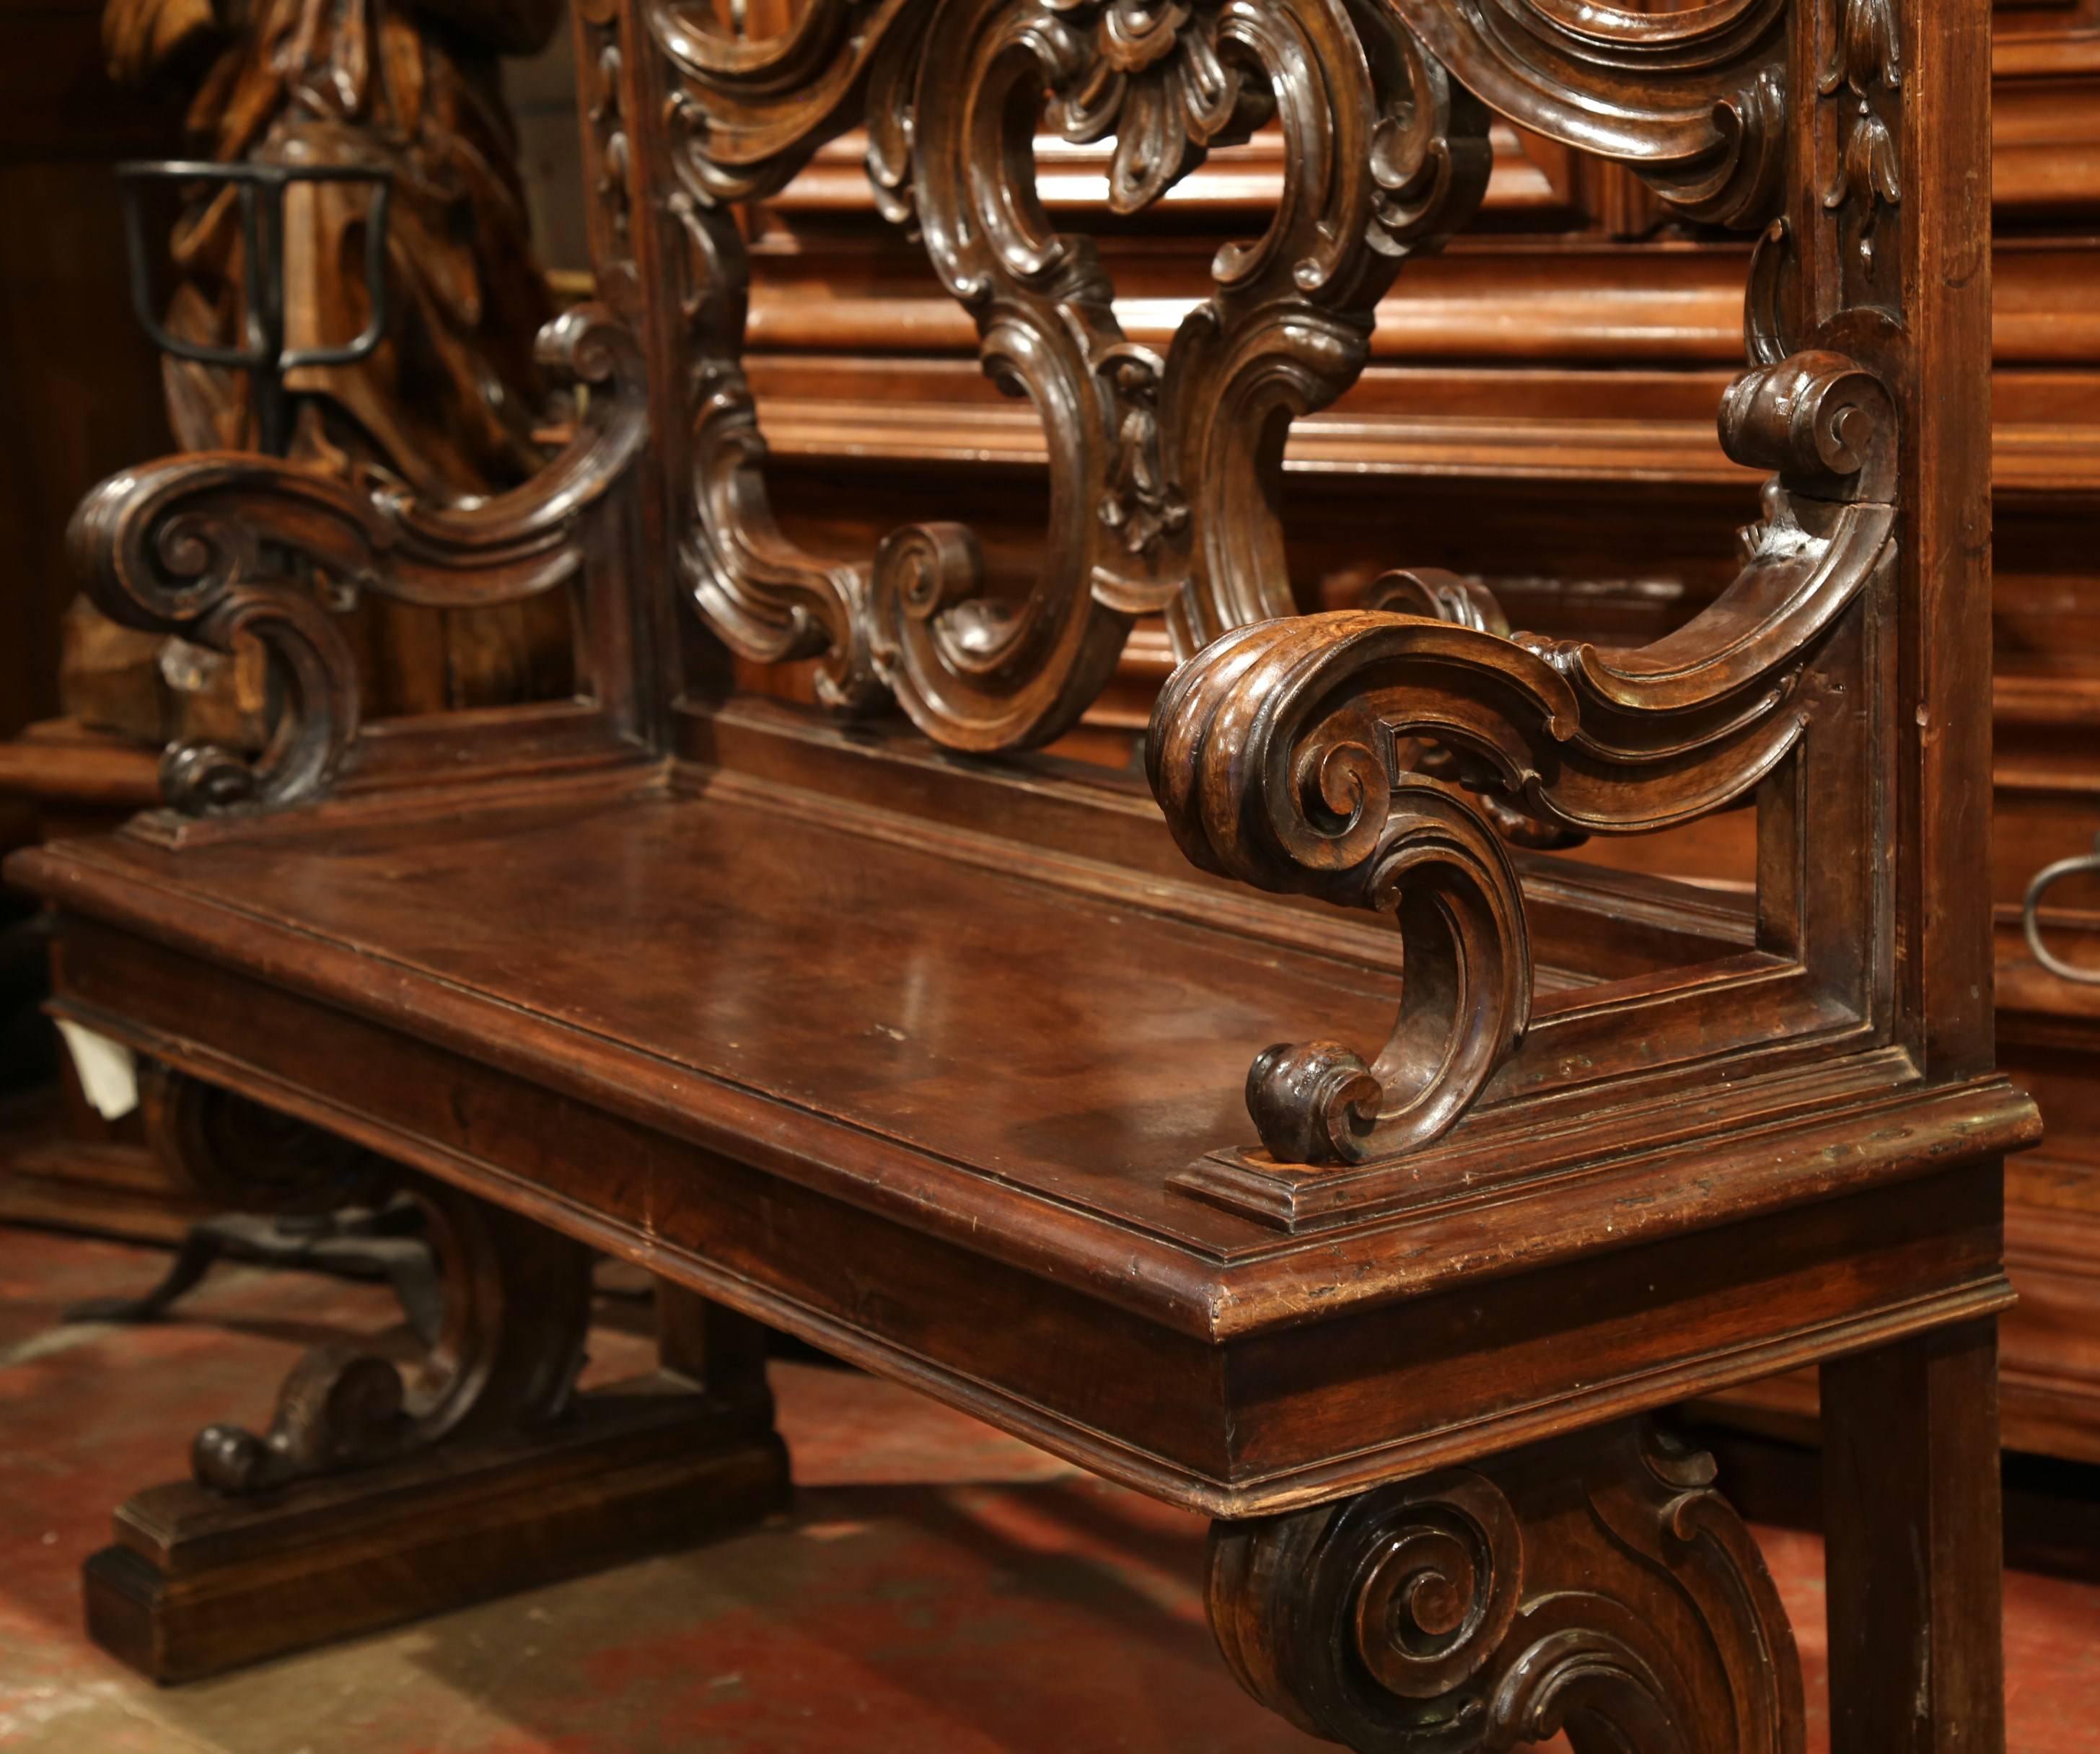 Hand-Carved Early 19th Century Italian Carved Walnut Bench with Back and Armrests